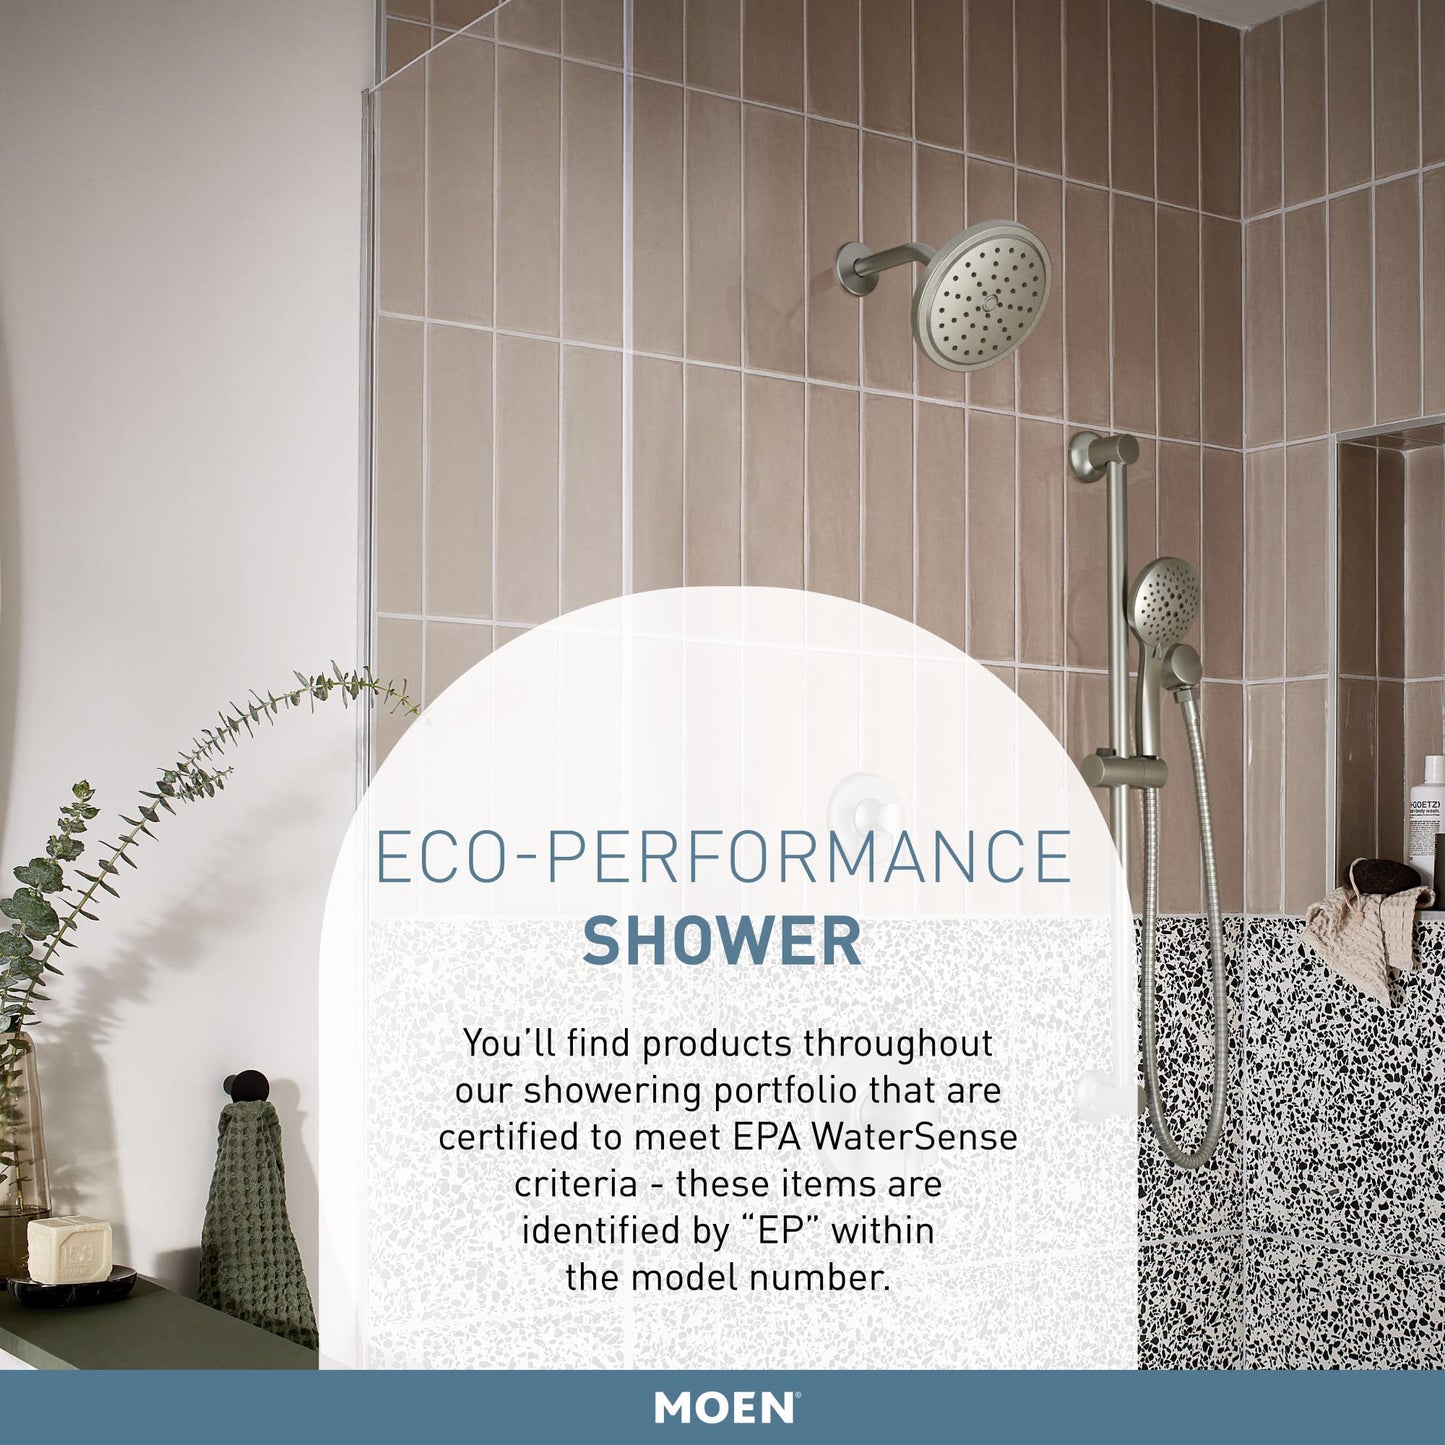 Moen Eco-Performance Oil-Rubbed Bronze 4-Spray Pattern Detachable Handheld Showerhead with 69-Inch-Long Hose with 30-Inch Slide Bar, 3669EPORB